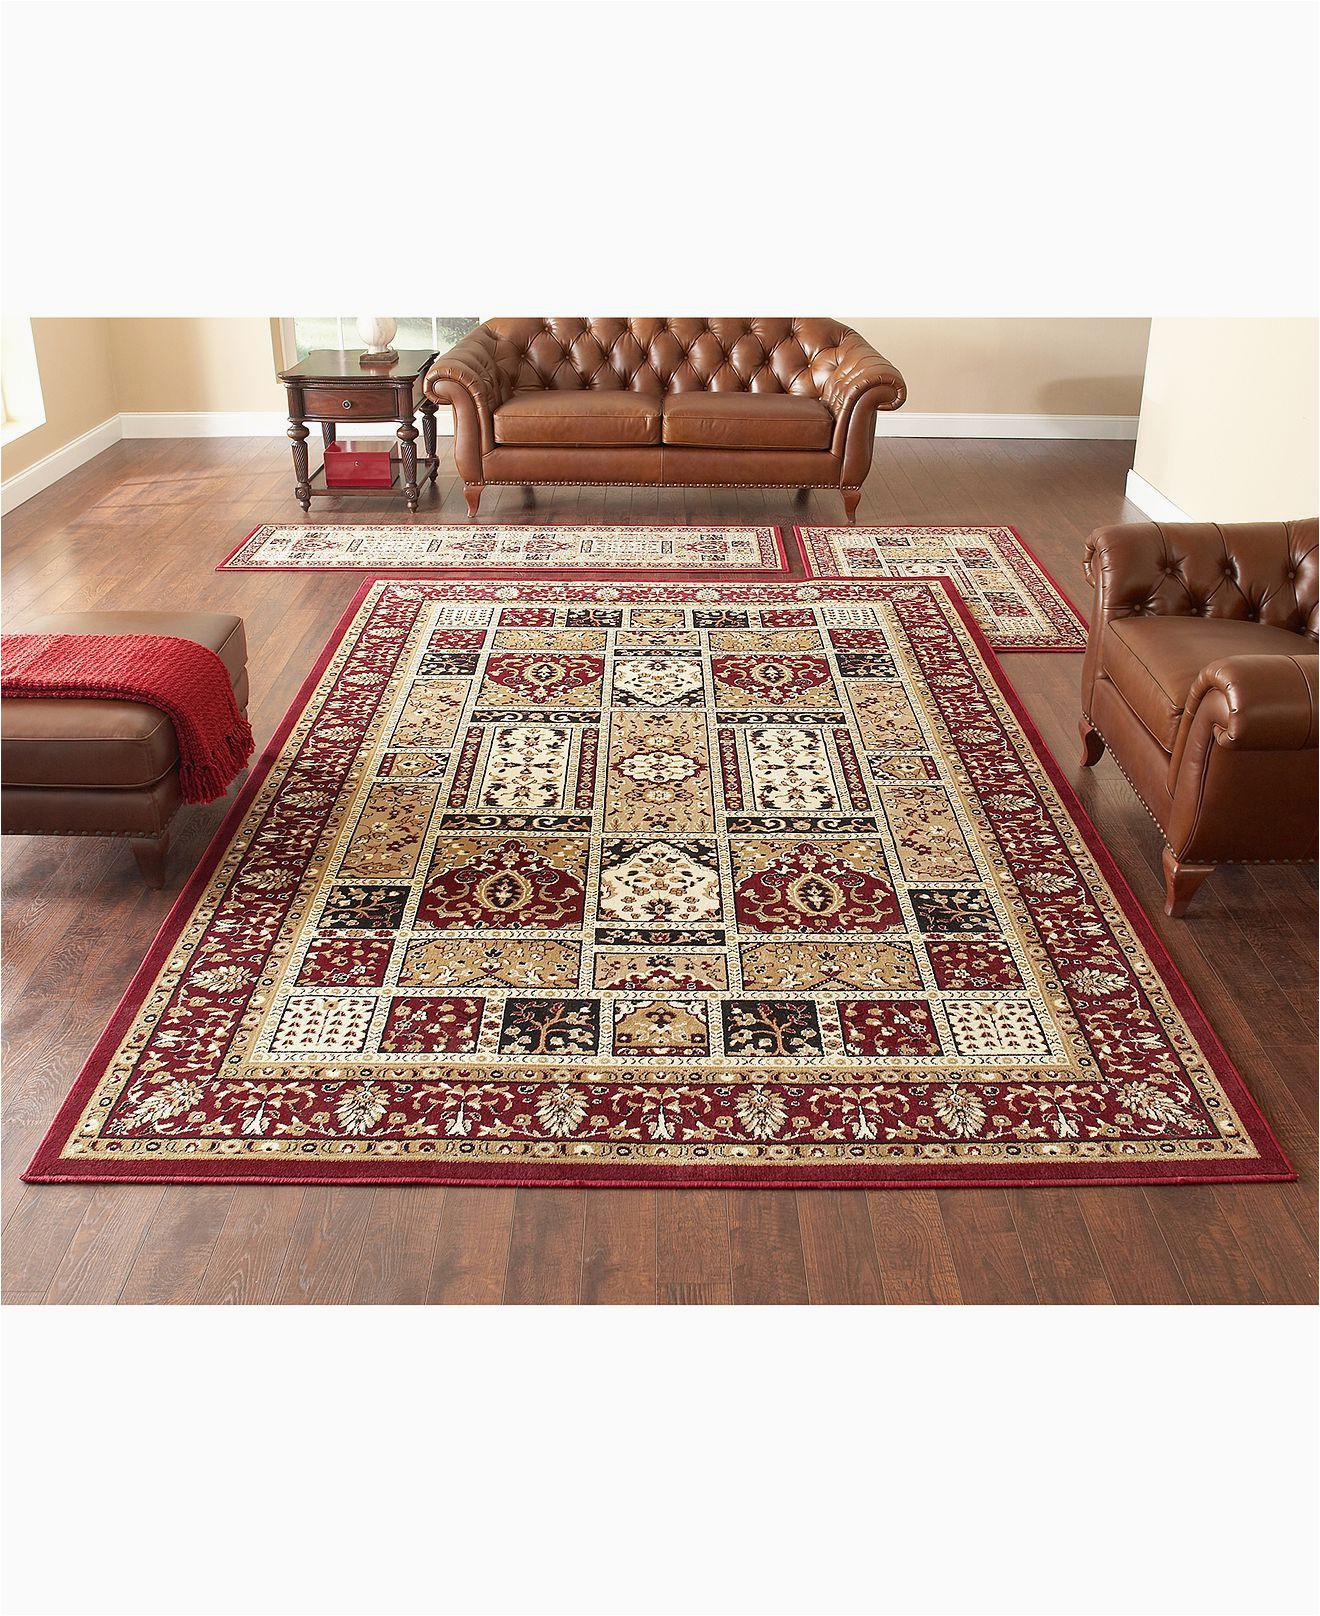 Area Rug Sets Home Décor Km Home Kenneth Mink area Rug Set Roma Collection 3 Piece